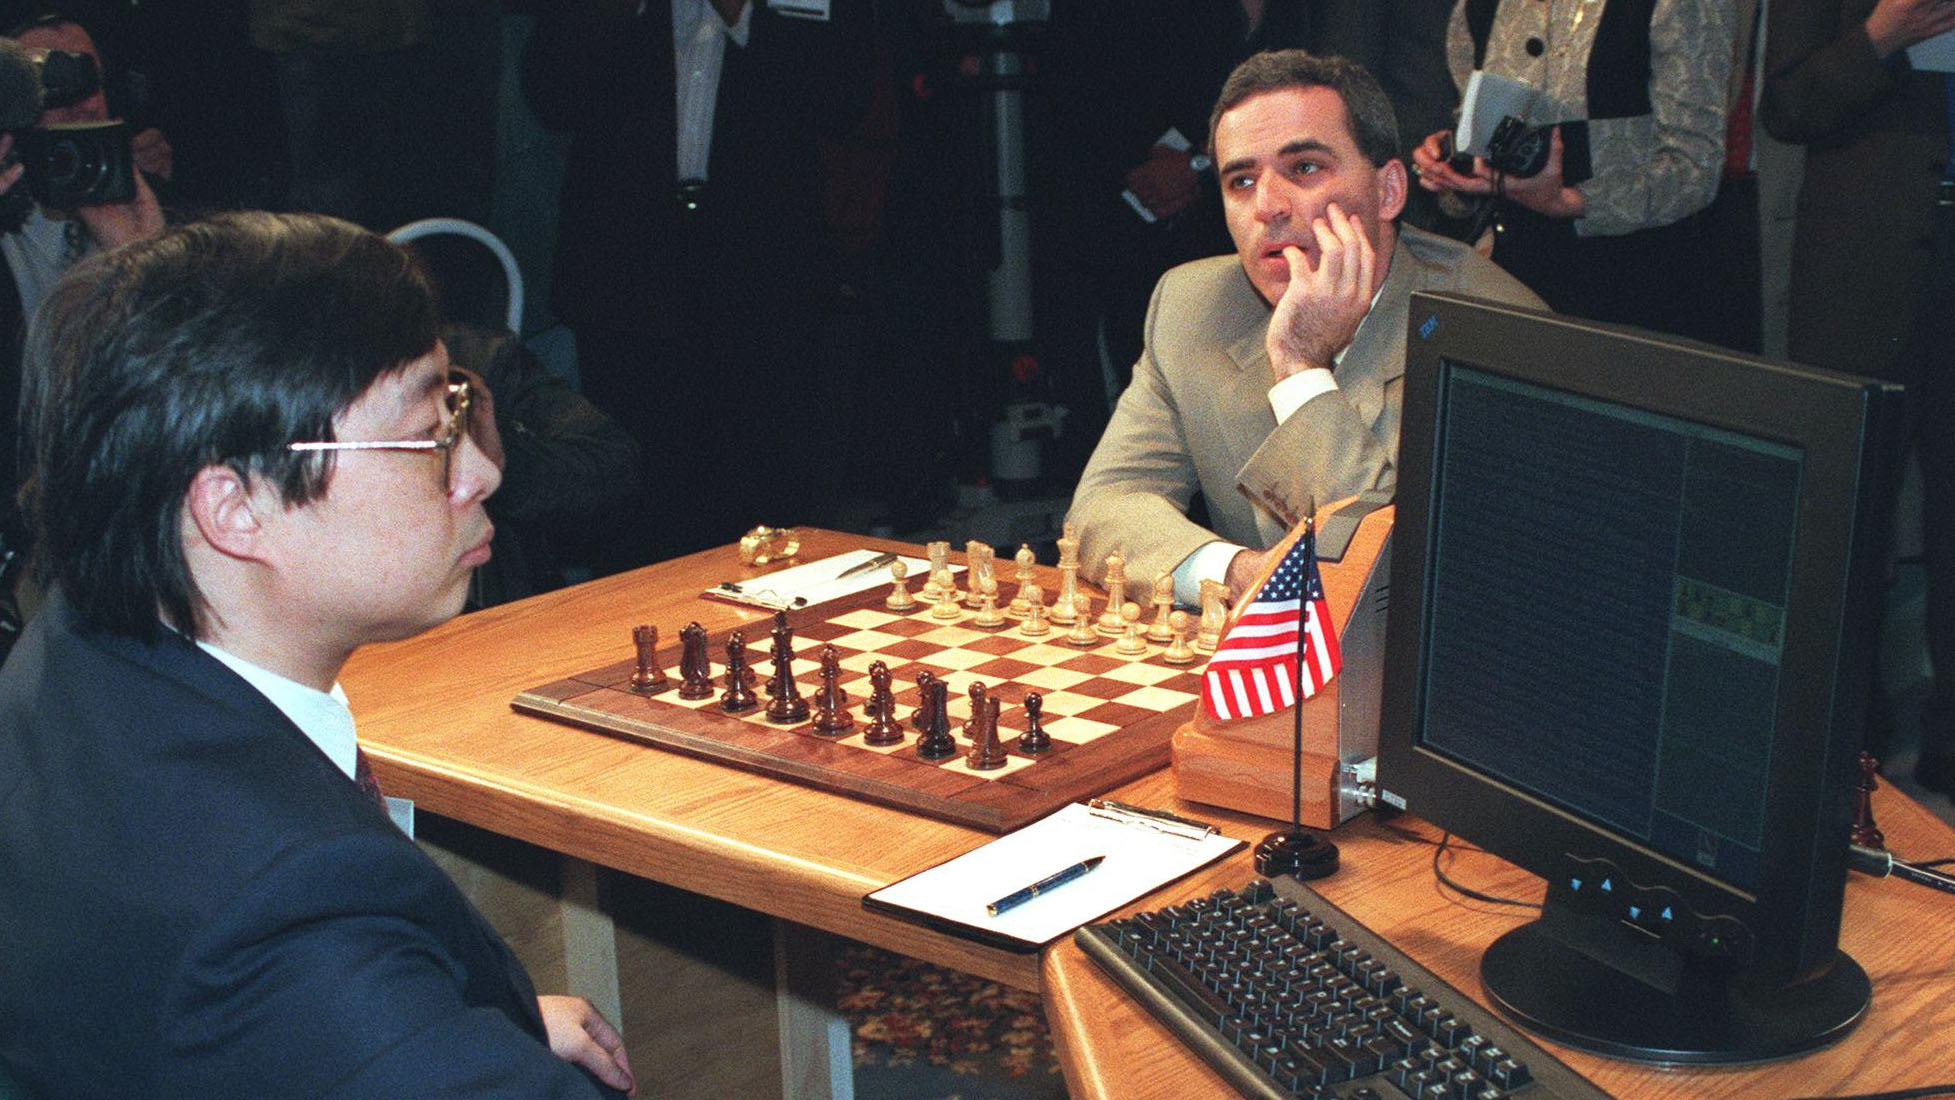 In 1997, an IBM computer beat a chess world champion for the first